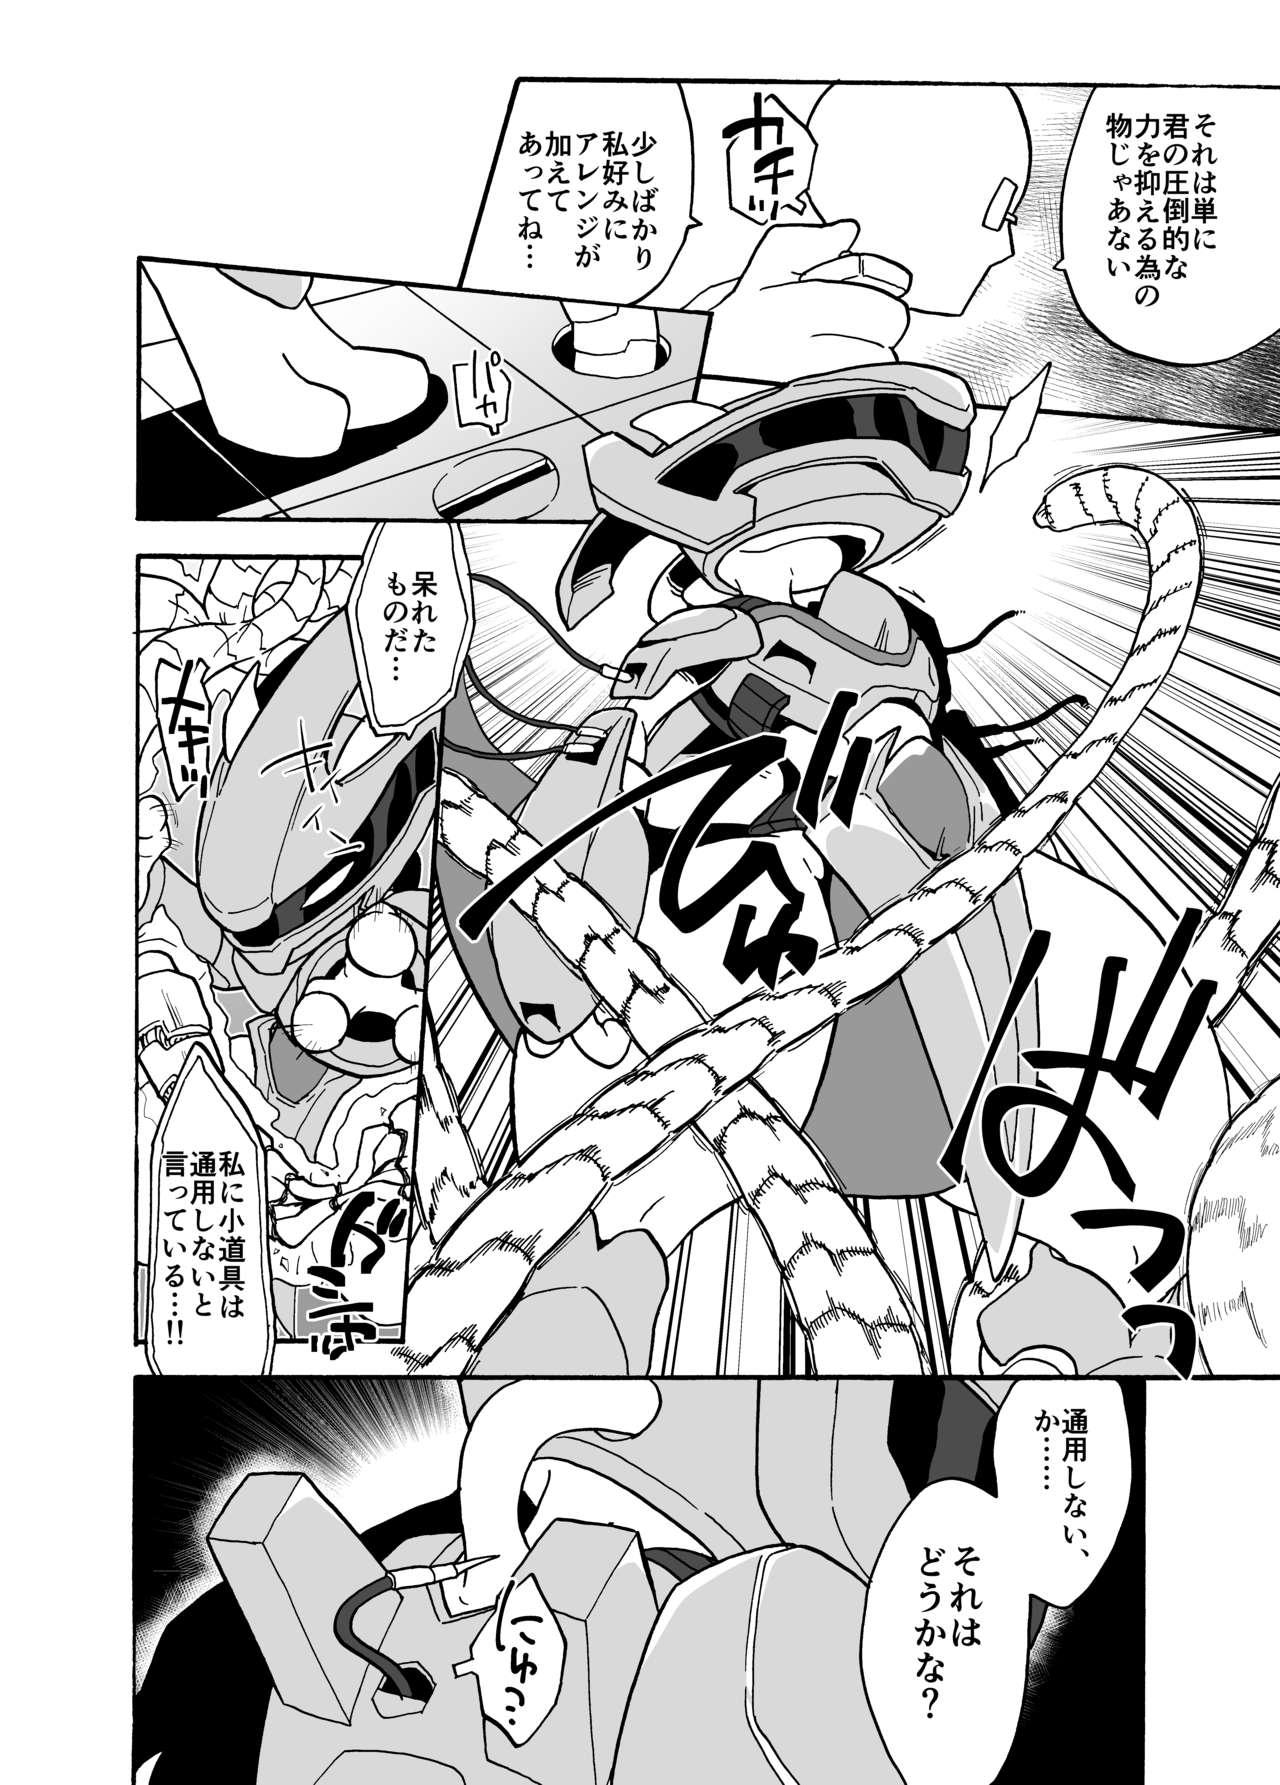 Oral Sex Mewtwo - Pokemon | pocket monsters Short Hair - Page 2